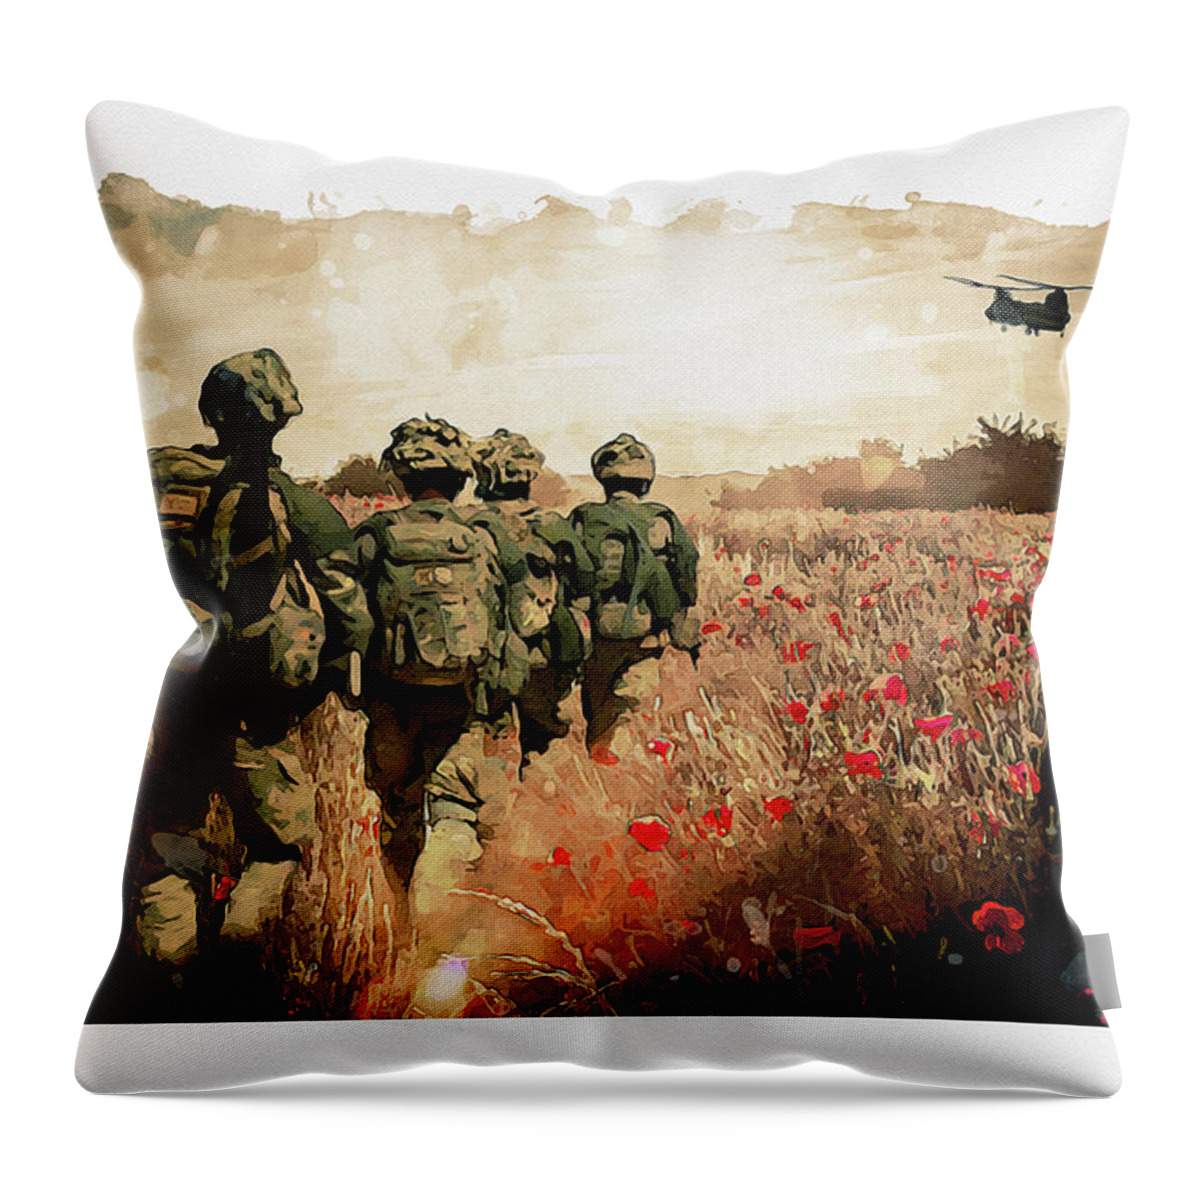 Soldiers And Poppies Throw Pillow featuring the digital art The Last Ride by Airpower Art